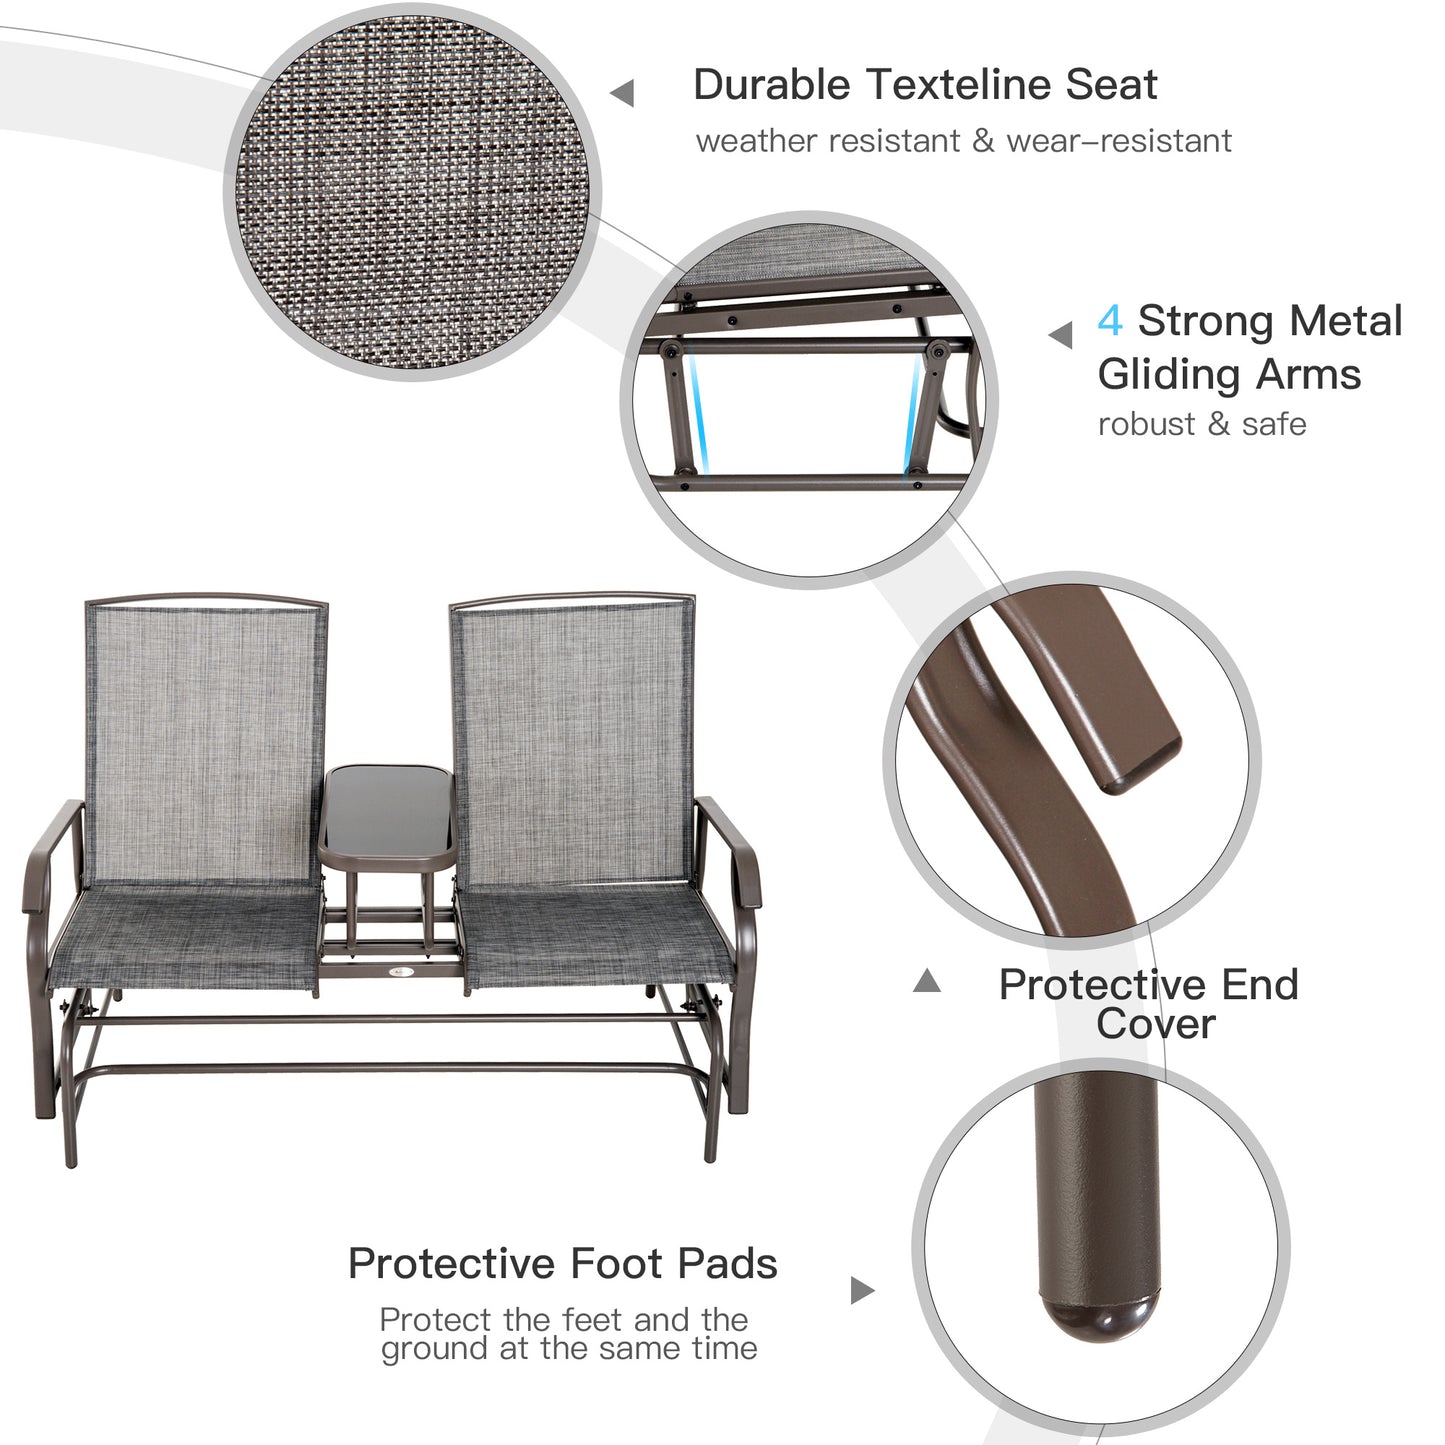 Outsunny 2-Seater Metal Texteline Rocking Seat Chair-Brown/Grey